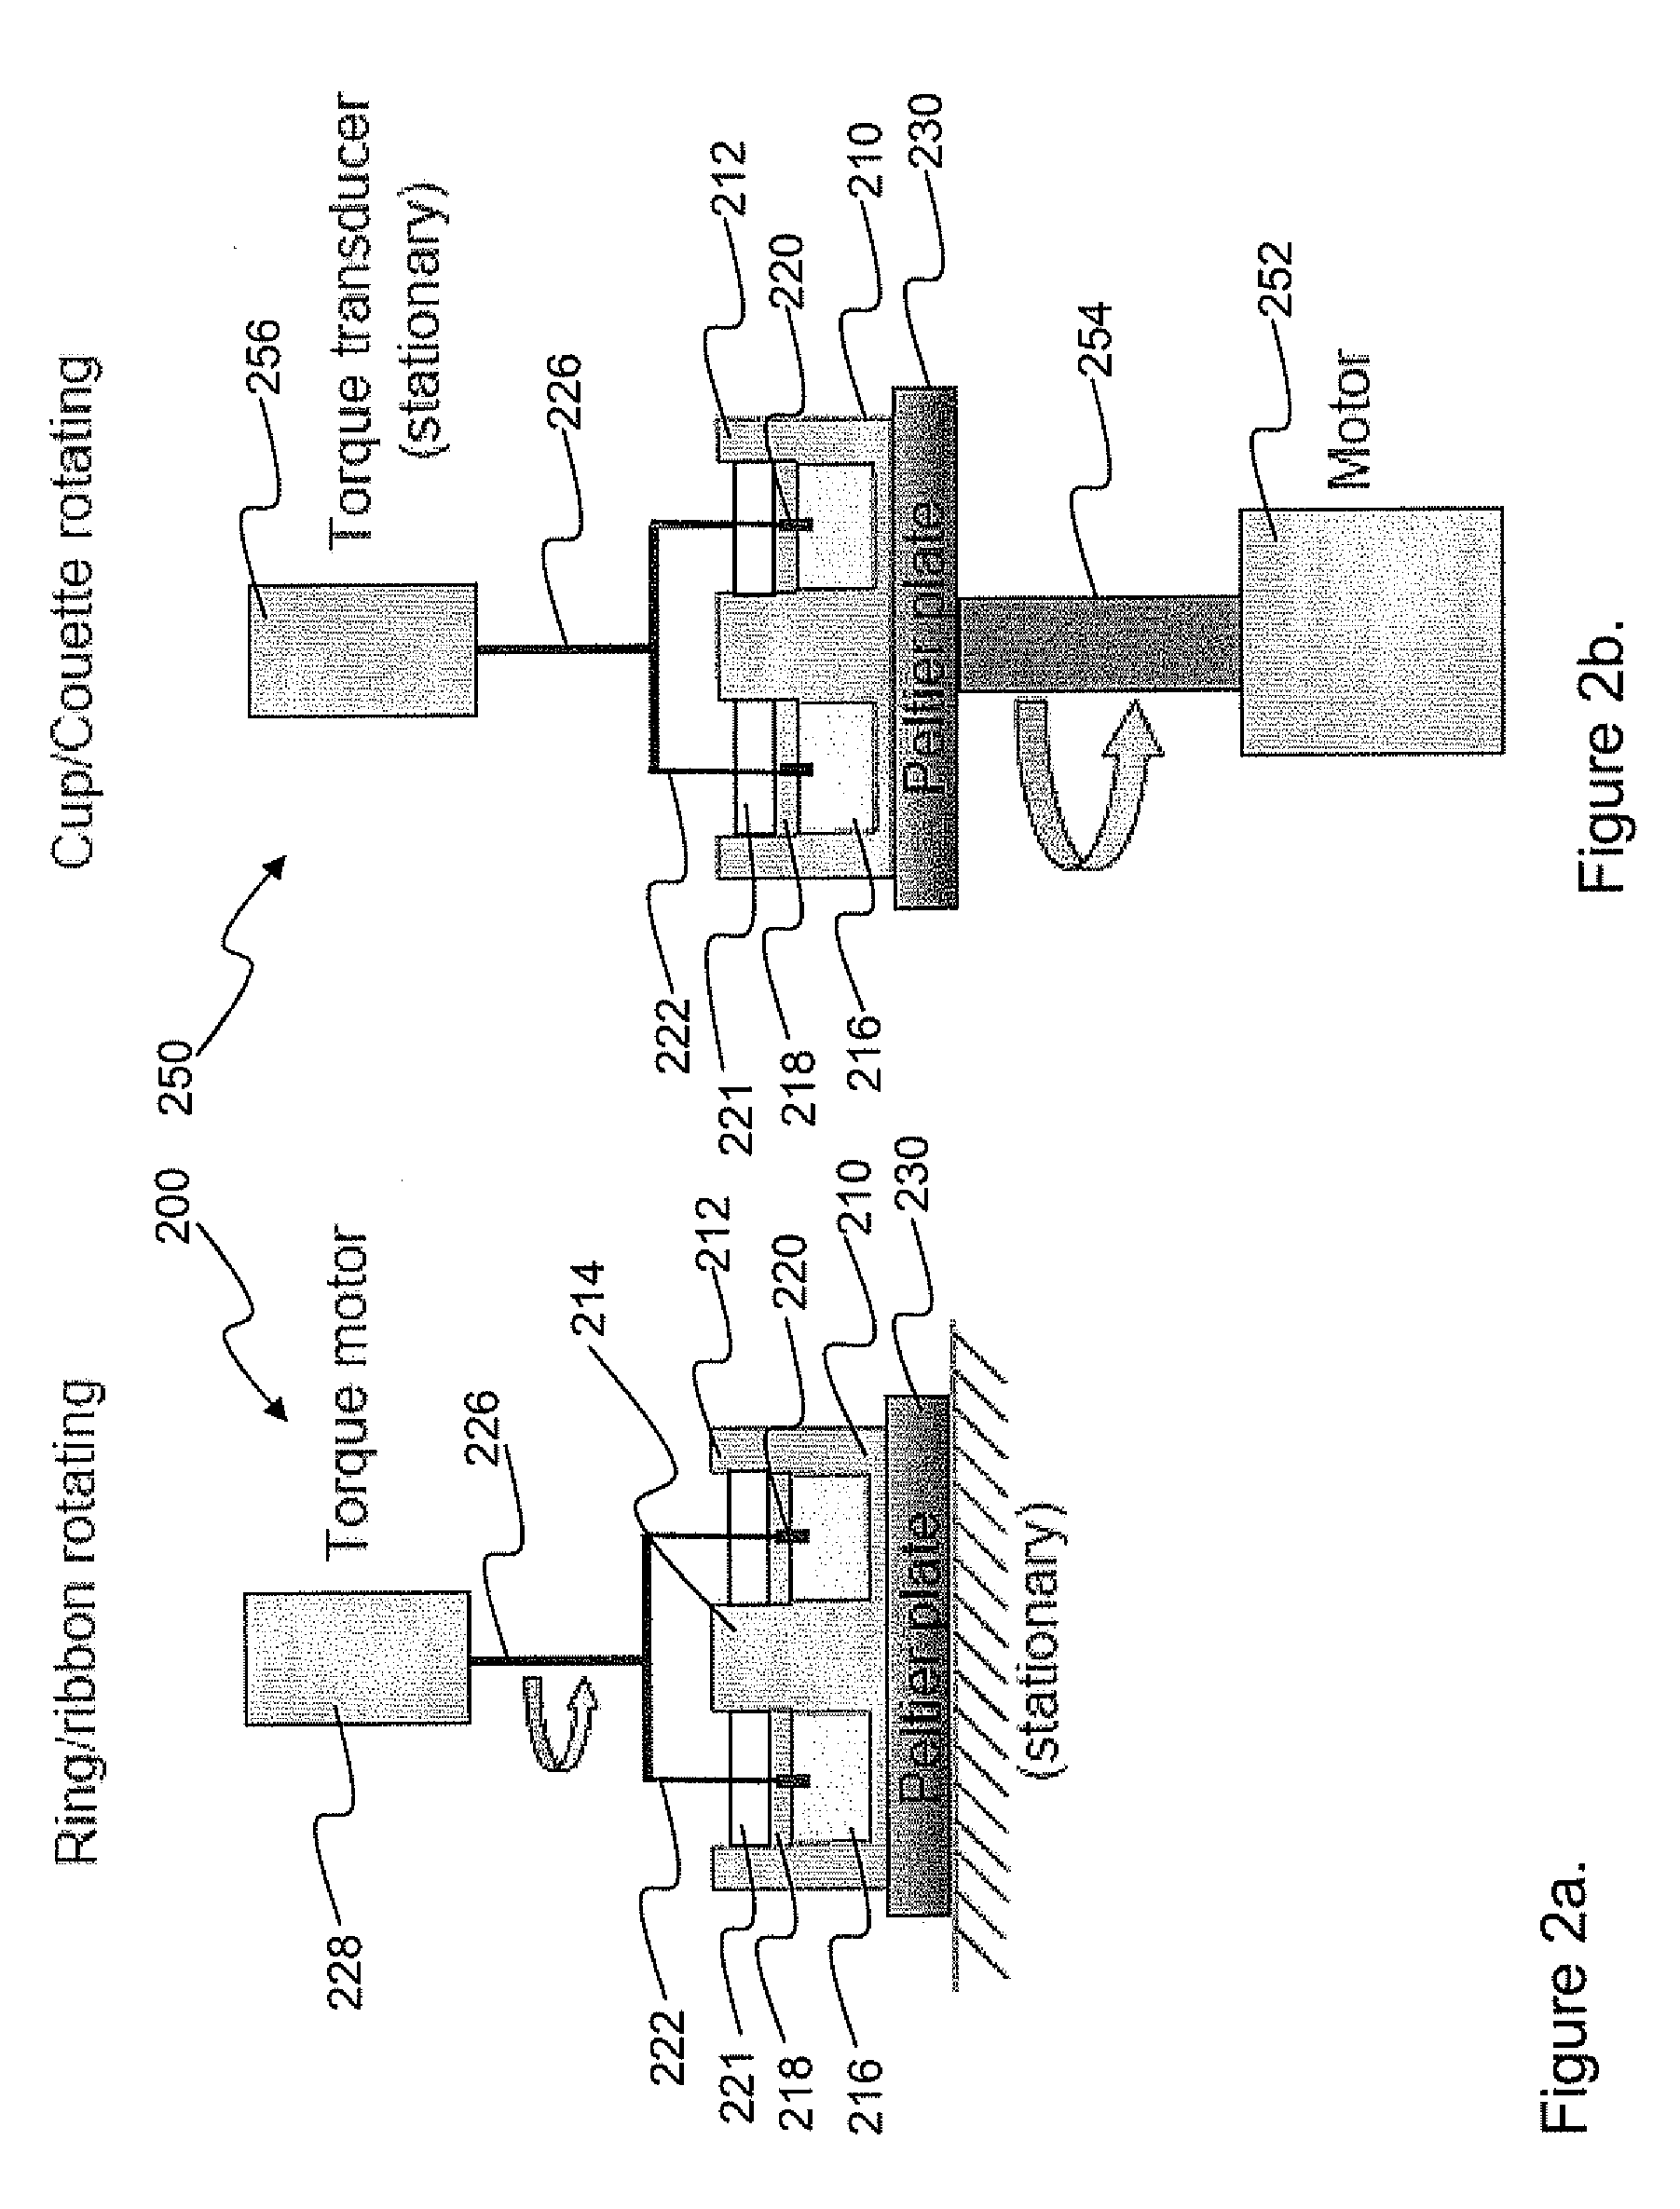 System and method for interfacial rheometry